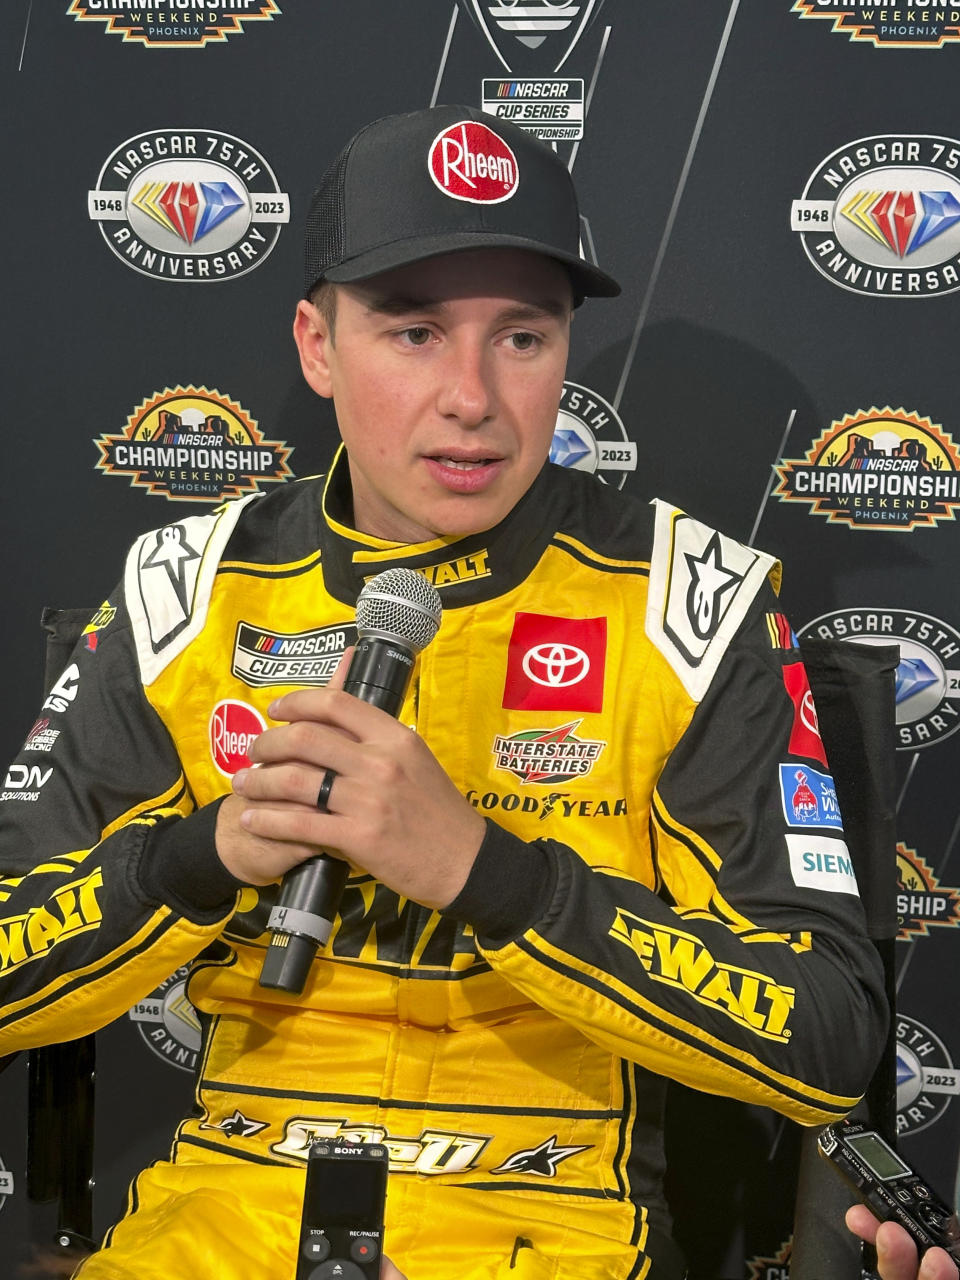 Driver Christopher Bell speaks during a news conference at Phoenix Raceway in Avondale, Ariz., Thursday, Nov. 2, 2023. NASCAR's finishes the season with the winner-take-all finale at Phoenix Raceway Sunday. (AP Photo/John Marshall)